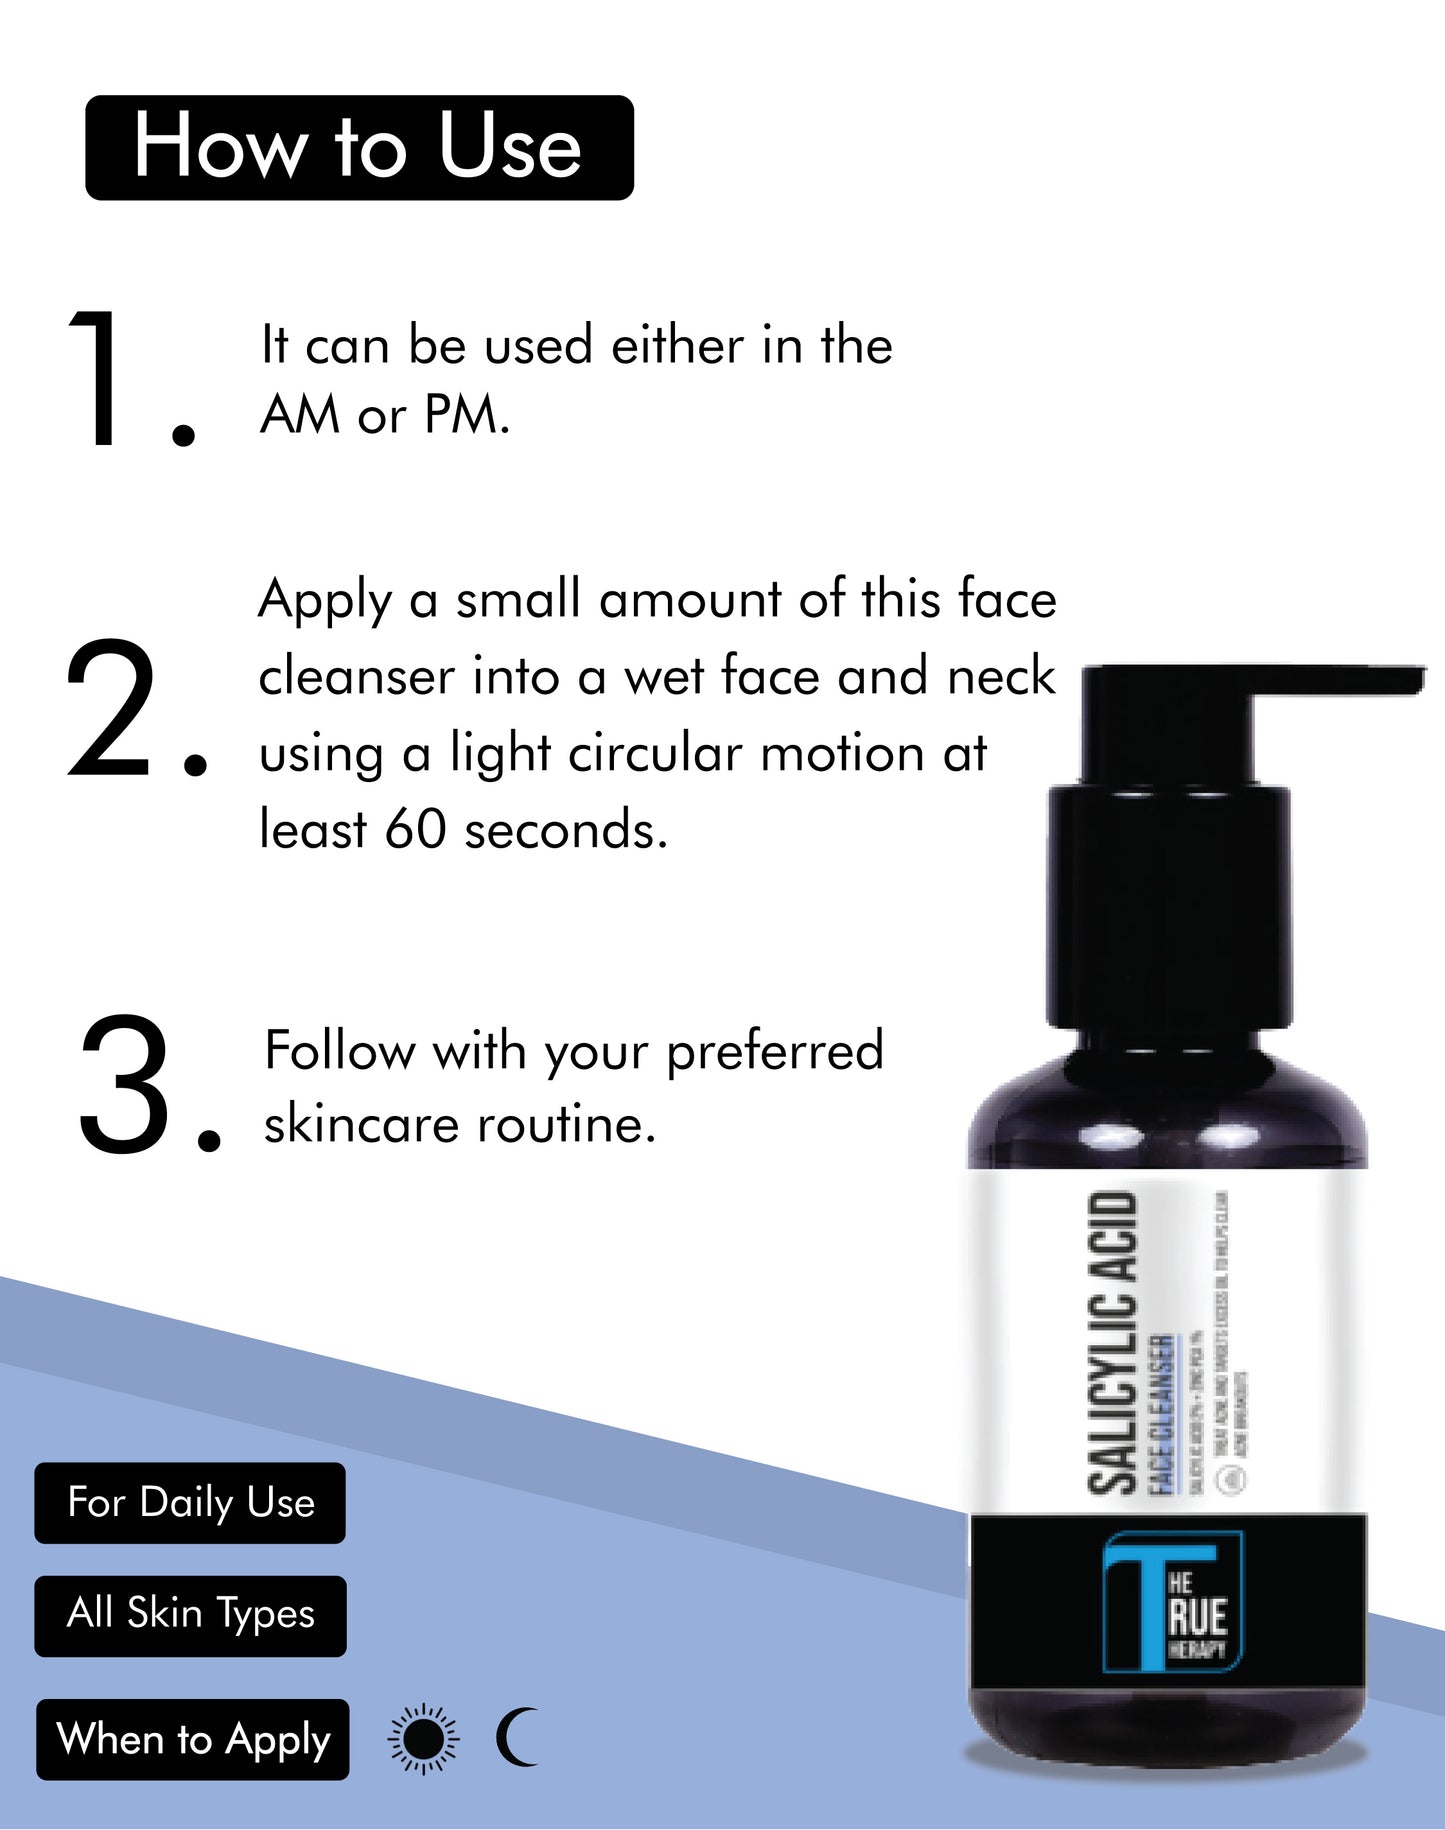 SALICYLIC ACID FACE CLEANSER  - HOW TO USE